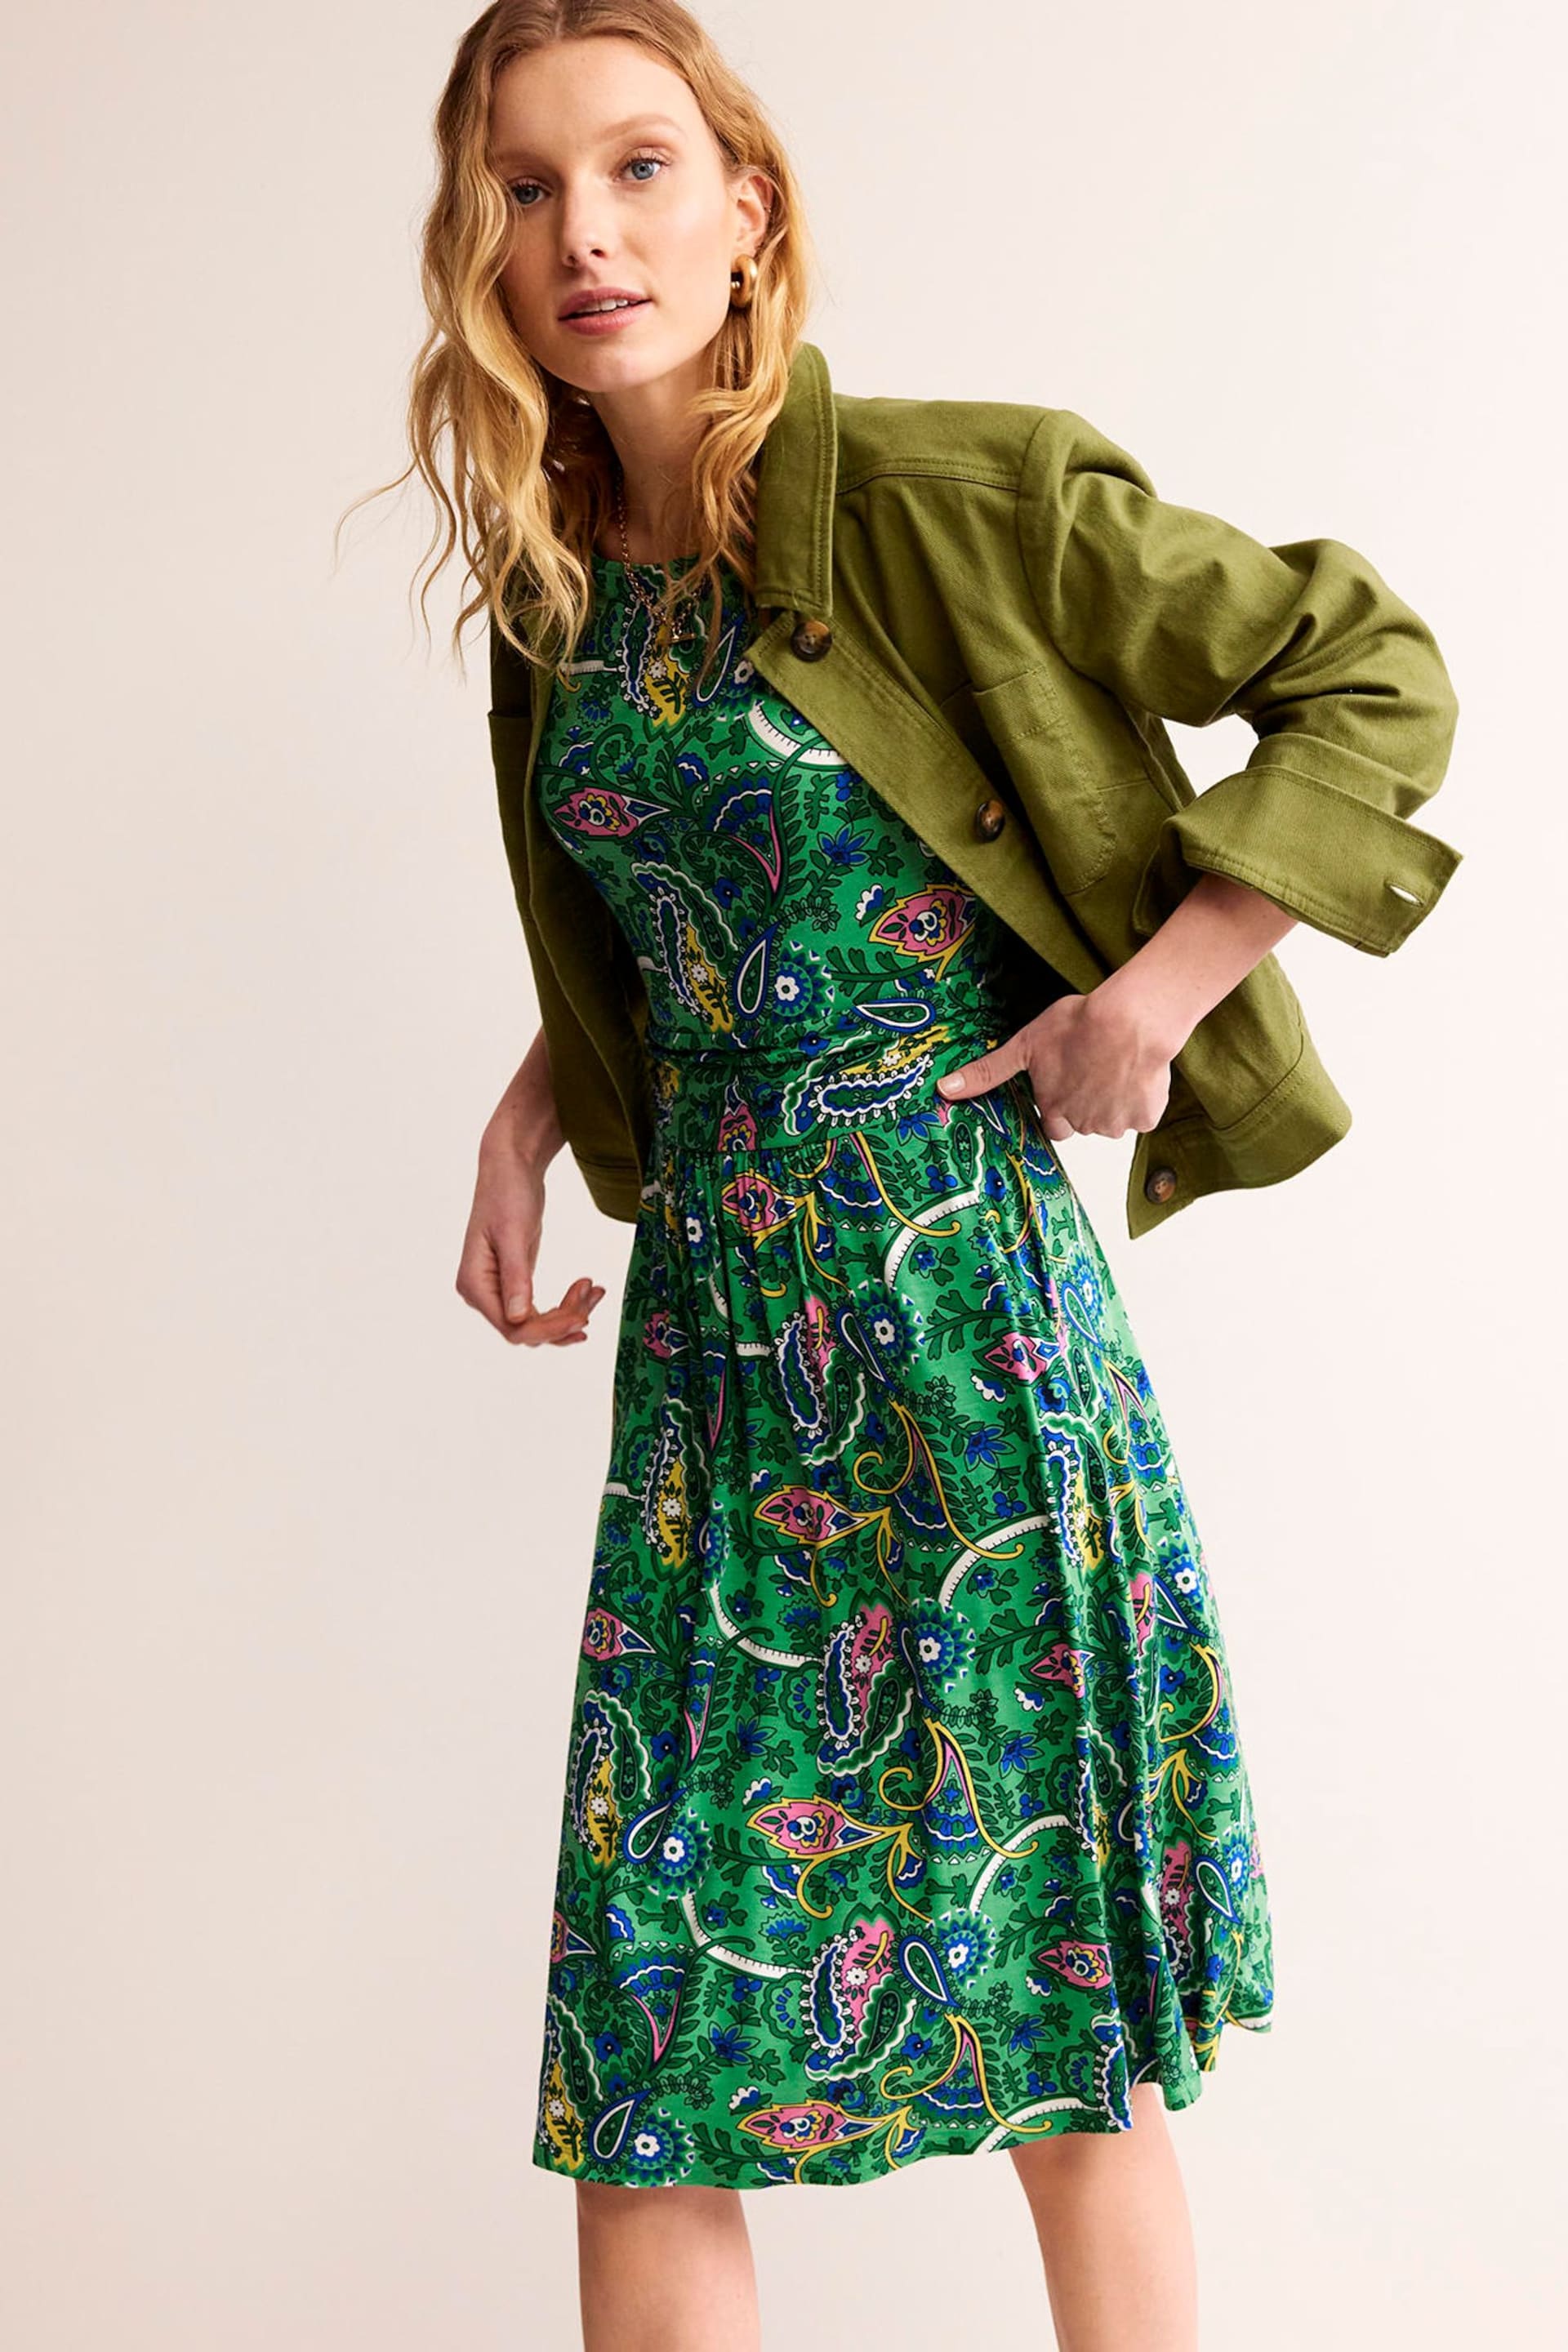 Boden Green Amelie Jersey Dress - Image 1 of 5